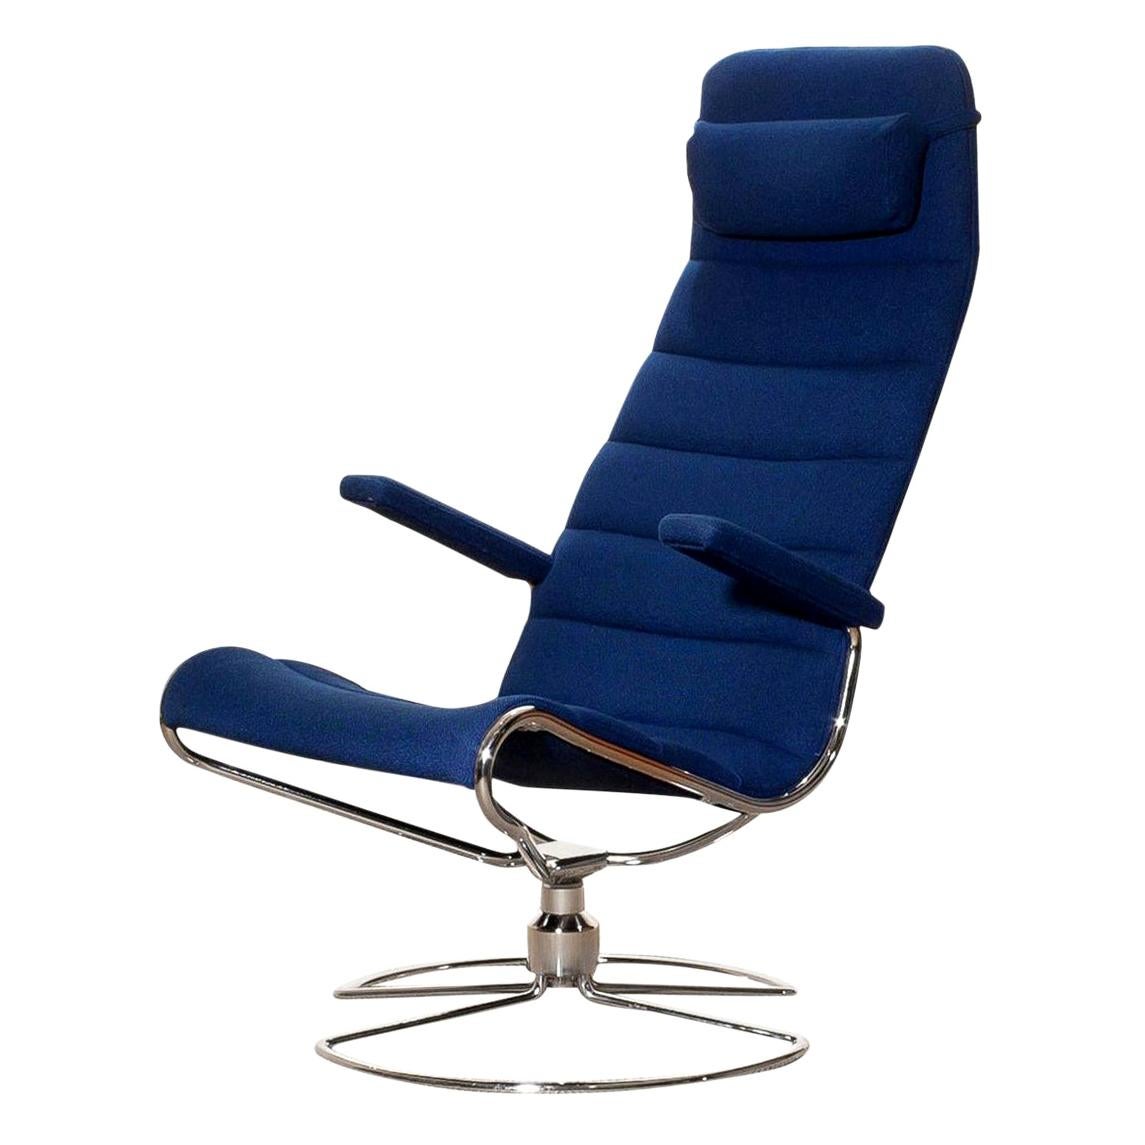 Beautiful 'Minister' chair designed by Bruno Mathsson.
It is upholstered with a royal blue wooden fabric mounted on a swivel base of tubular chromed steel.
The chair is in very good condition.
Period 1980s.
Dimensions: H 109 cm x W 60 cm x D 77